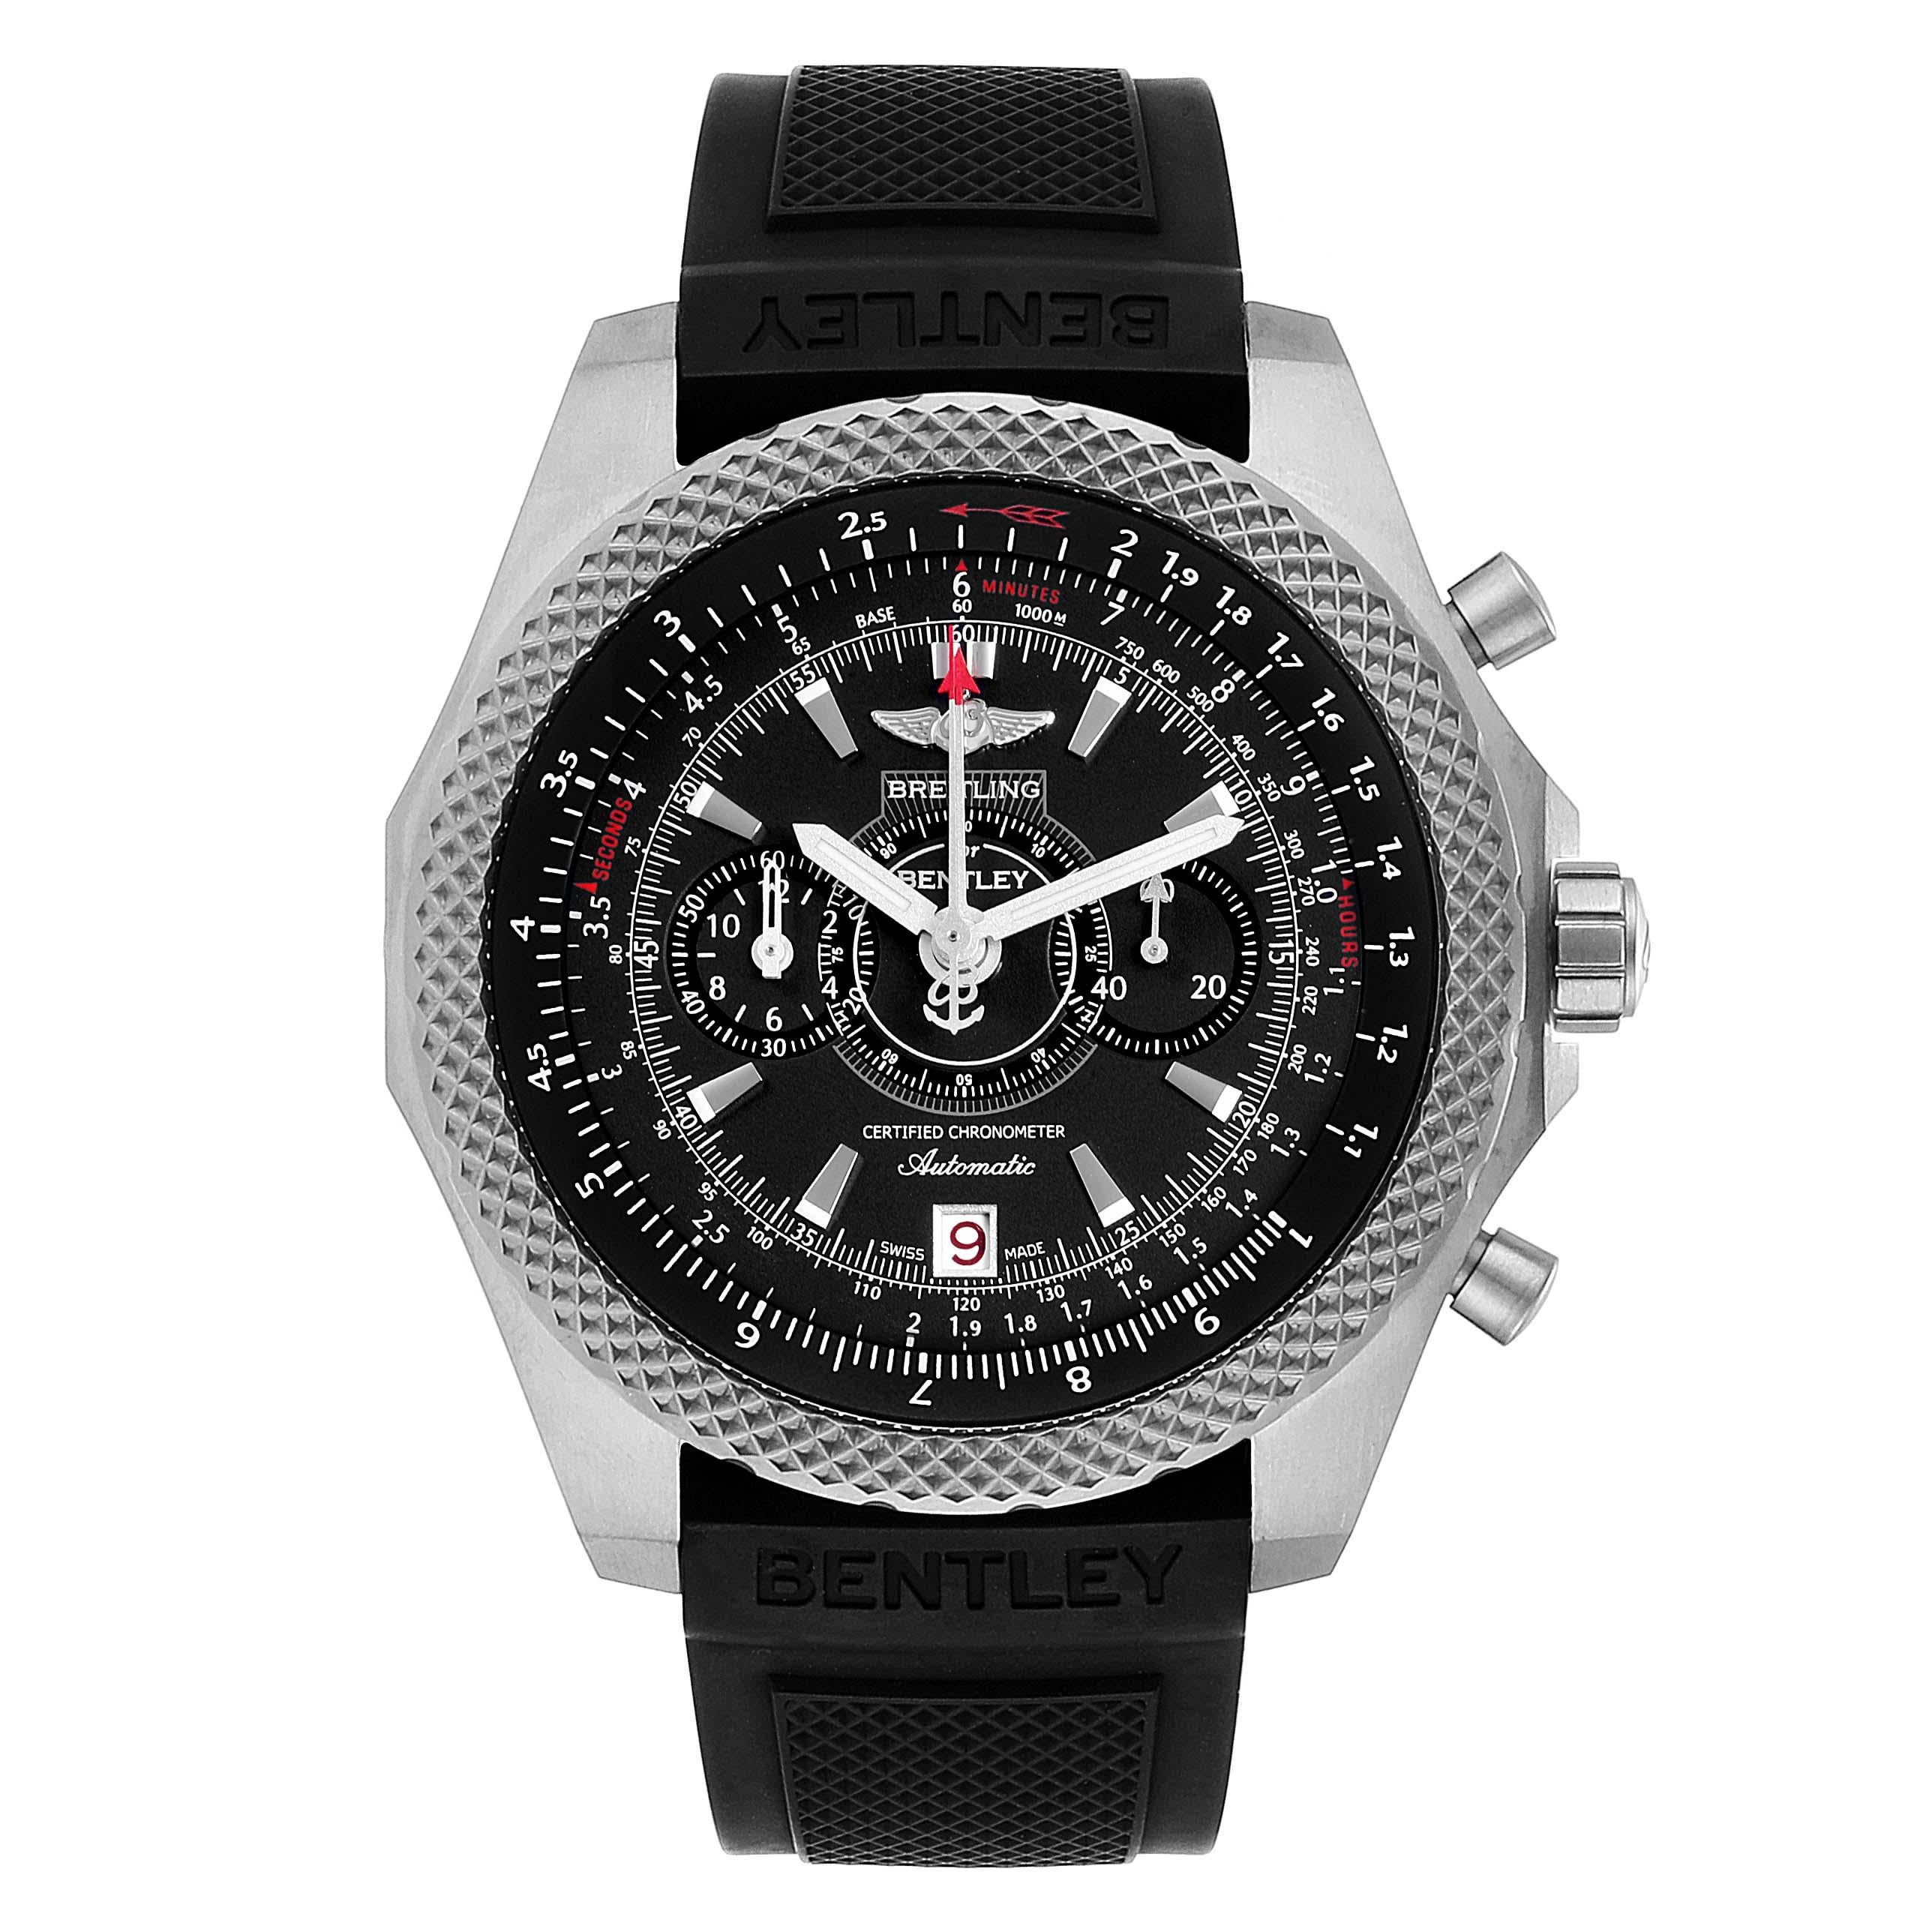 Breitling Bentley Super Sports Rubber Strap Mens Watch E27365 Box. Automatic self-winding officially certified chronometer movement. Chronograph function. Titanium case 49.0 mm in diameter. Titanium screwed-down crown and pushers. Titanium